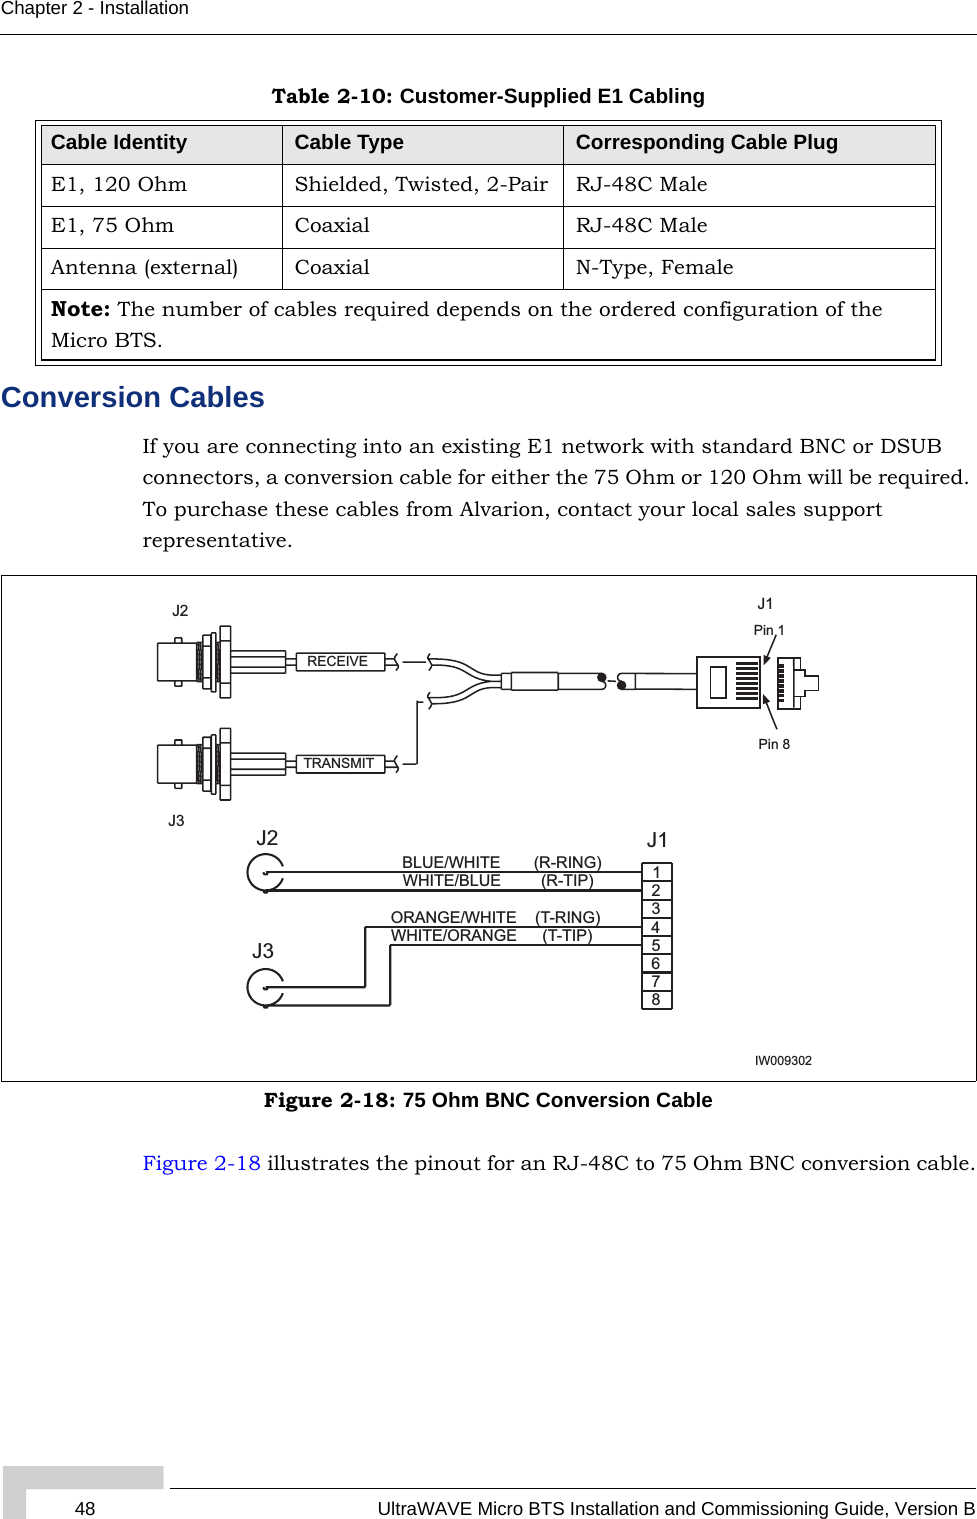 48 UltraWAVE Micro BTS Installation and Commissioning Guide, Version BChapter 2 - InstallationConversion CablesIf you are connecting into an existing E1 network with standard BNC or DSUB connectors, a conversion cable for either the 75 Ohm or 120 Ohm will be required. To purchase these cables from Alvarion, contact your local sales support representative.Figure 2-18 illustrates the pinout for an RJ-48C to 75 Ohm BNC conversion cable.Table 2-10: Customer-Supplied E1 Cabling Cable Identity Cable Type Corresponding Cable PlugE1, 120 Ohm Shielded, Twisted, 2-Pair RJ-48C MaleE1, 75 Ohm Coaxial RJ-48C MaleAntenna (external) Coaxial N-Type, FemaleNote: The number of cables required depends on the ordered configuration of the Micro BTS.Figure 2-18: 75 Ohm BNC Conversion CableIW0093028ORANGE/WHITEBLUE/WHITEWHITE/ORANGEWHITE/BLUE (R-TIP)(R-RING)(T-TIP)(T-RING)1235674J2J3J1J2J3RECEIVETRANSMITPin 1Pin 8J1